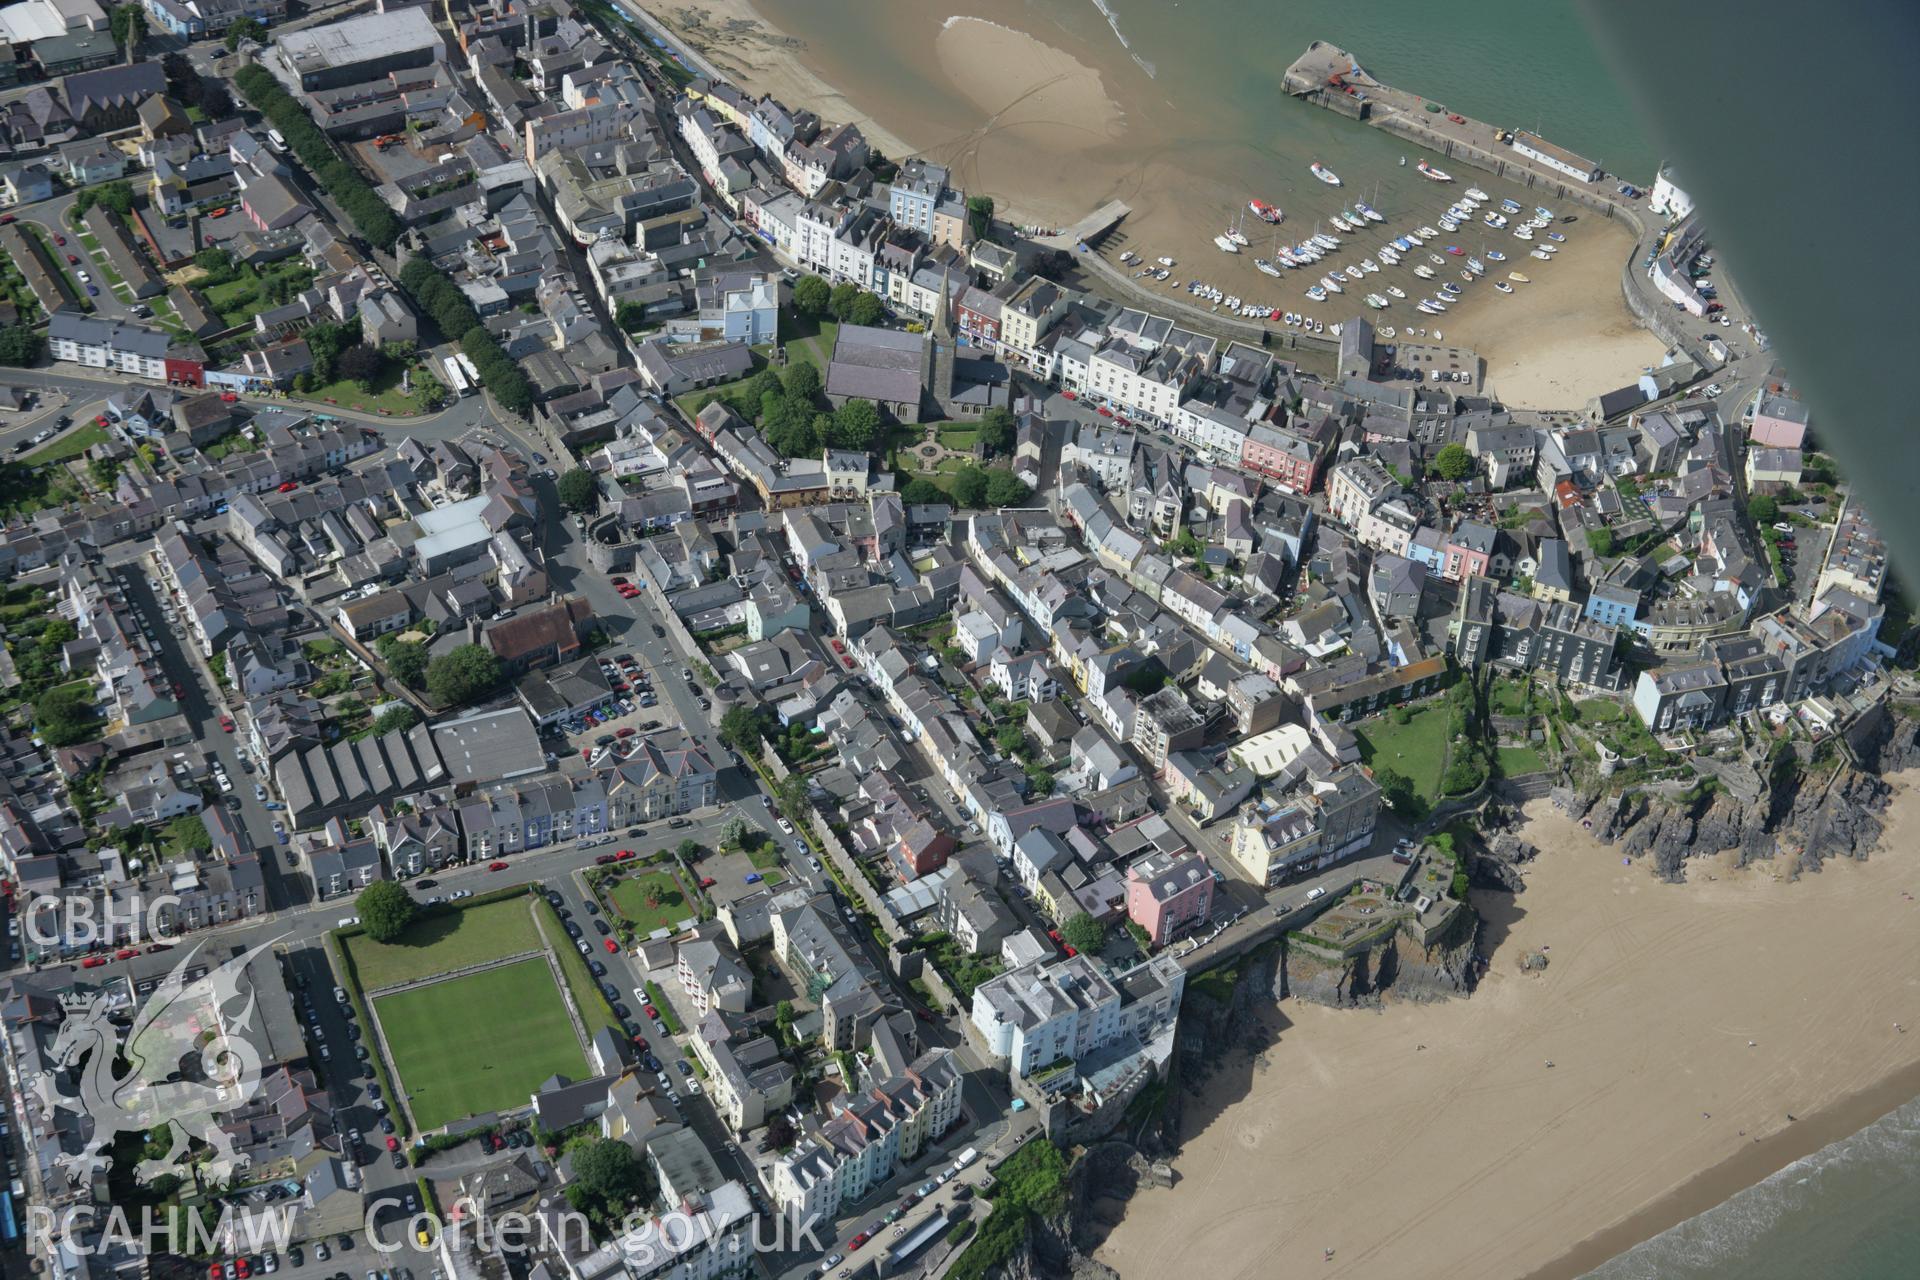 RCAHMW colour oblique aerial photograph of Tenby. Taken on 11 July 2006 by Toby Driver.